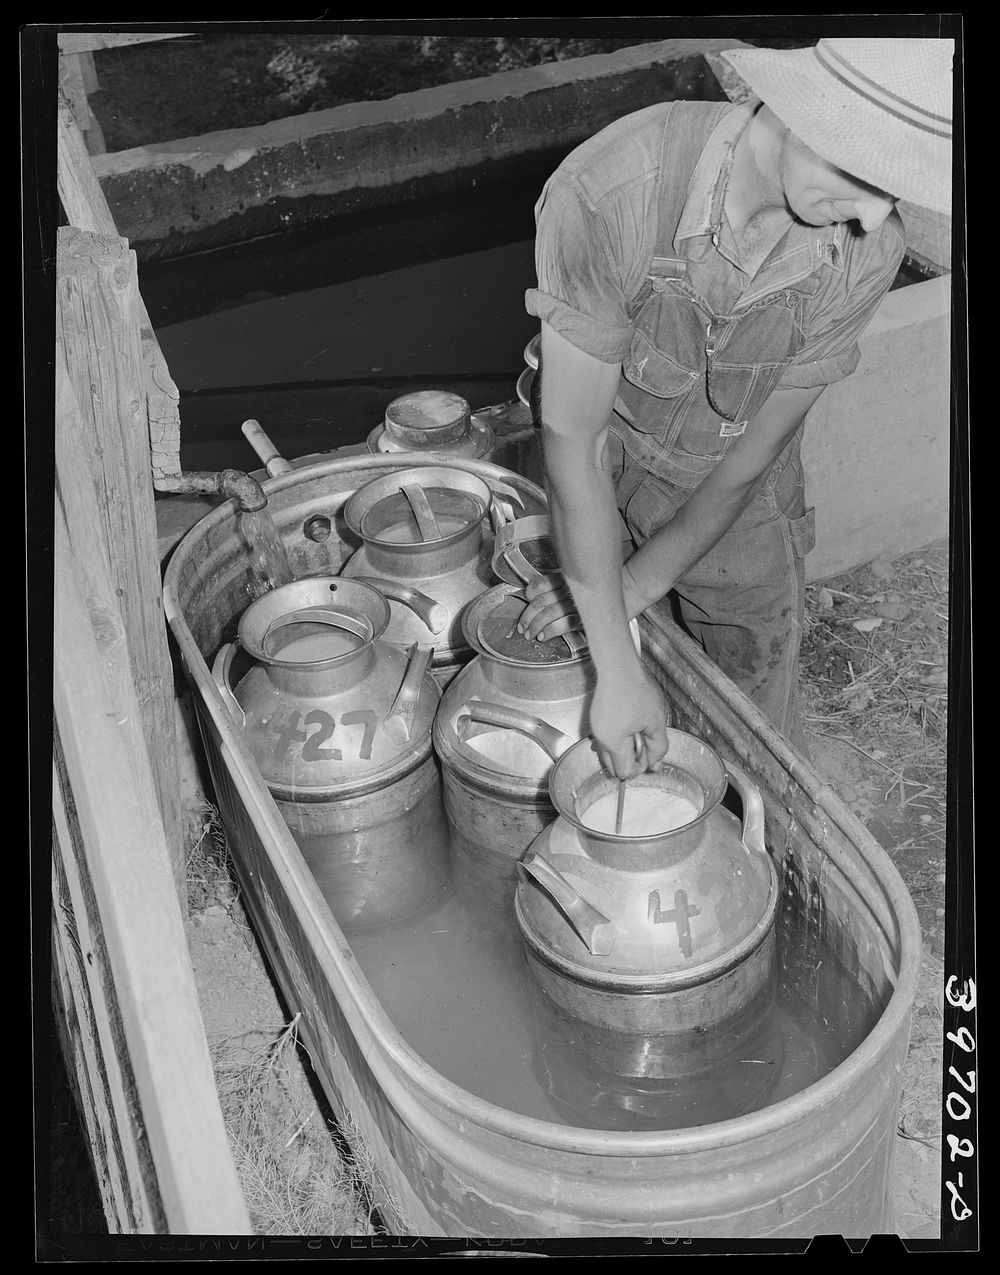 Member of the Dairymen's Cooperative Creamery cooling fresh milk in water trough on his farm. Caldwell, Canyon County, Idaho…